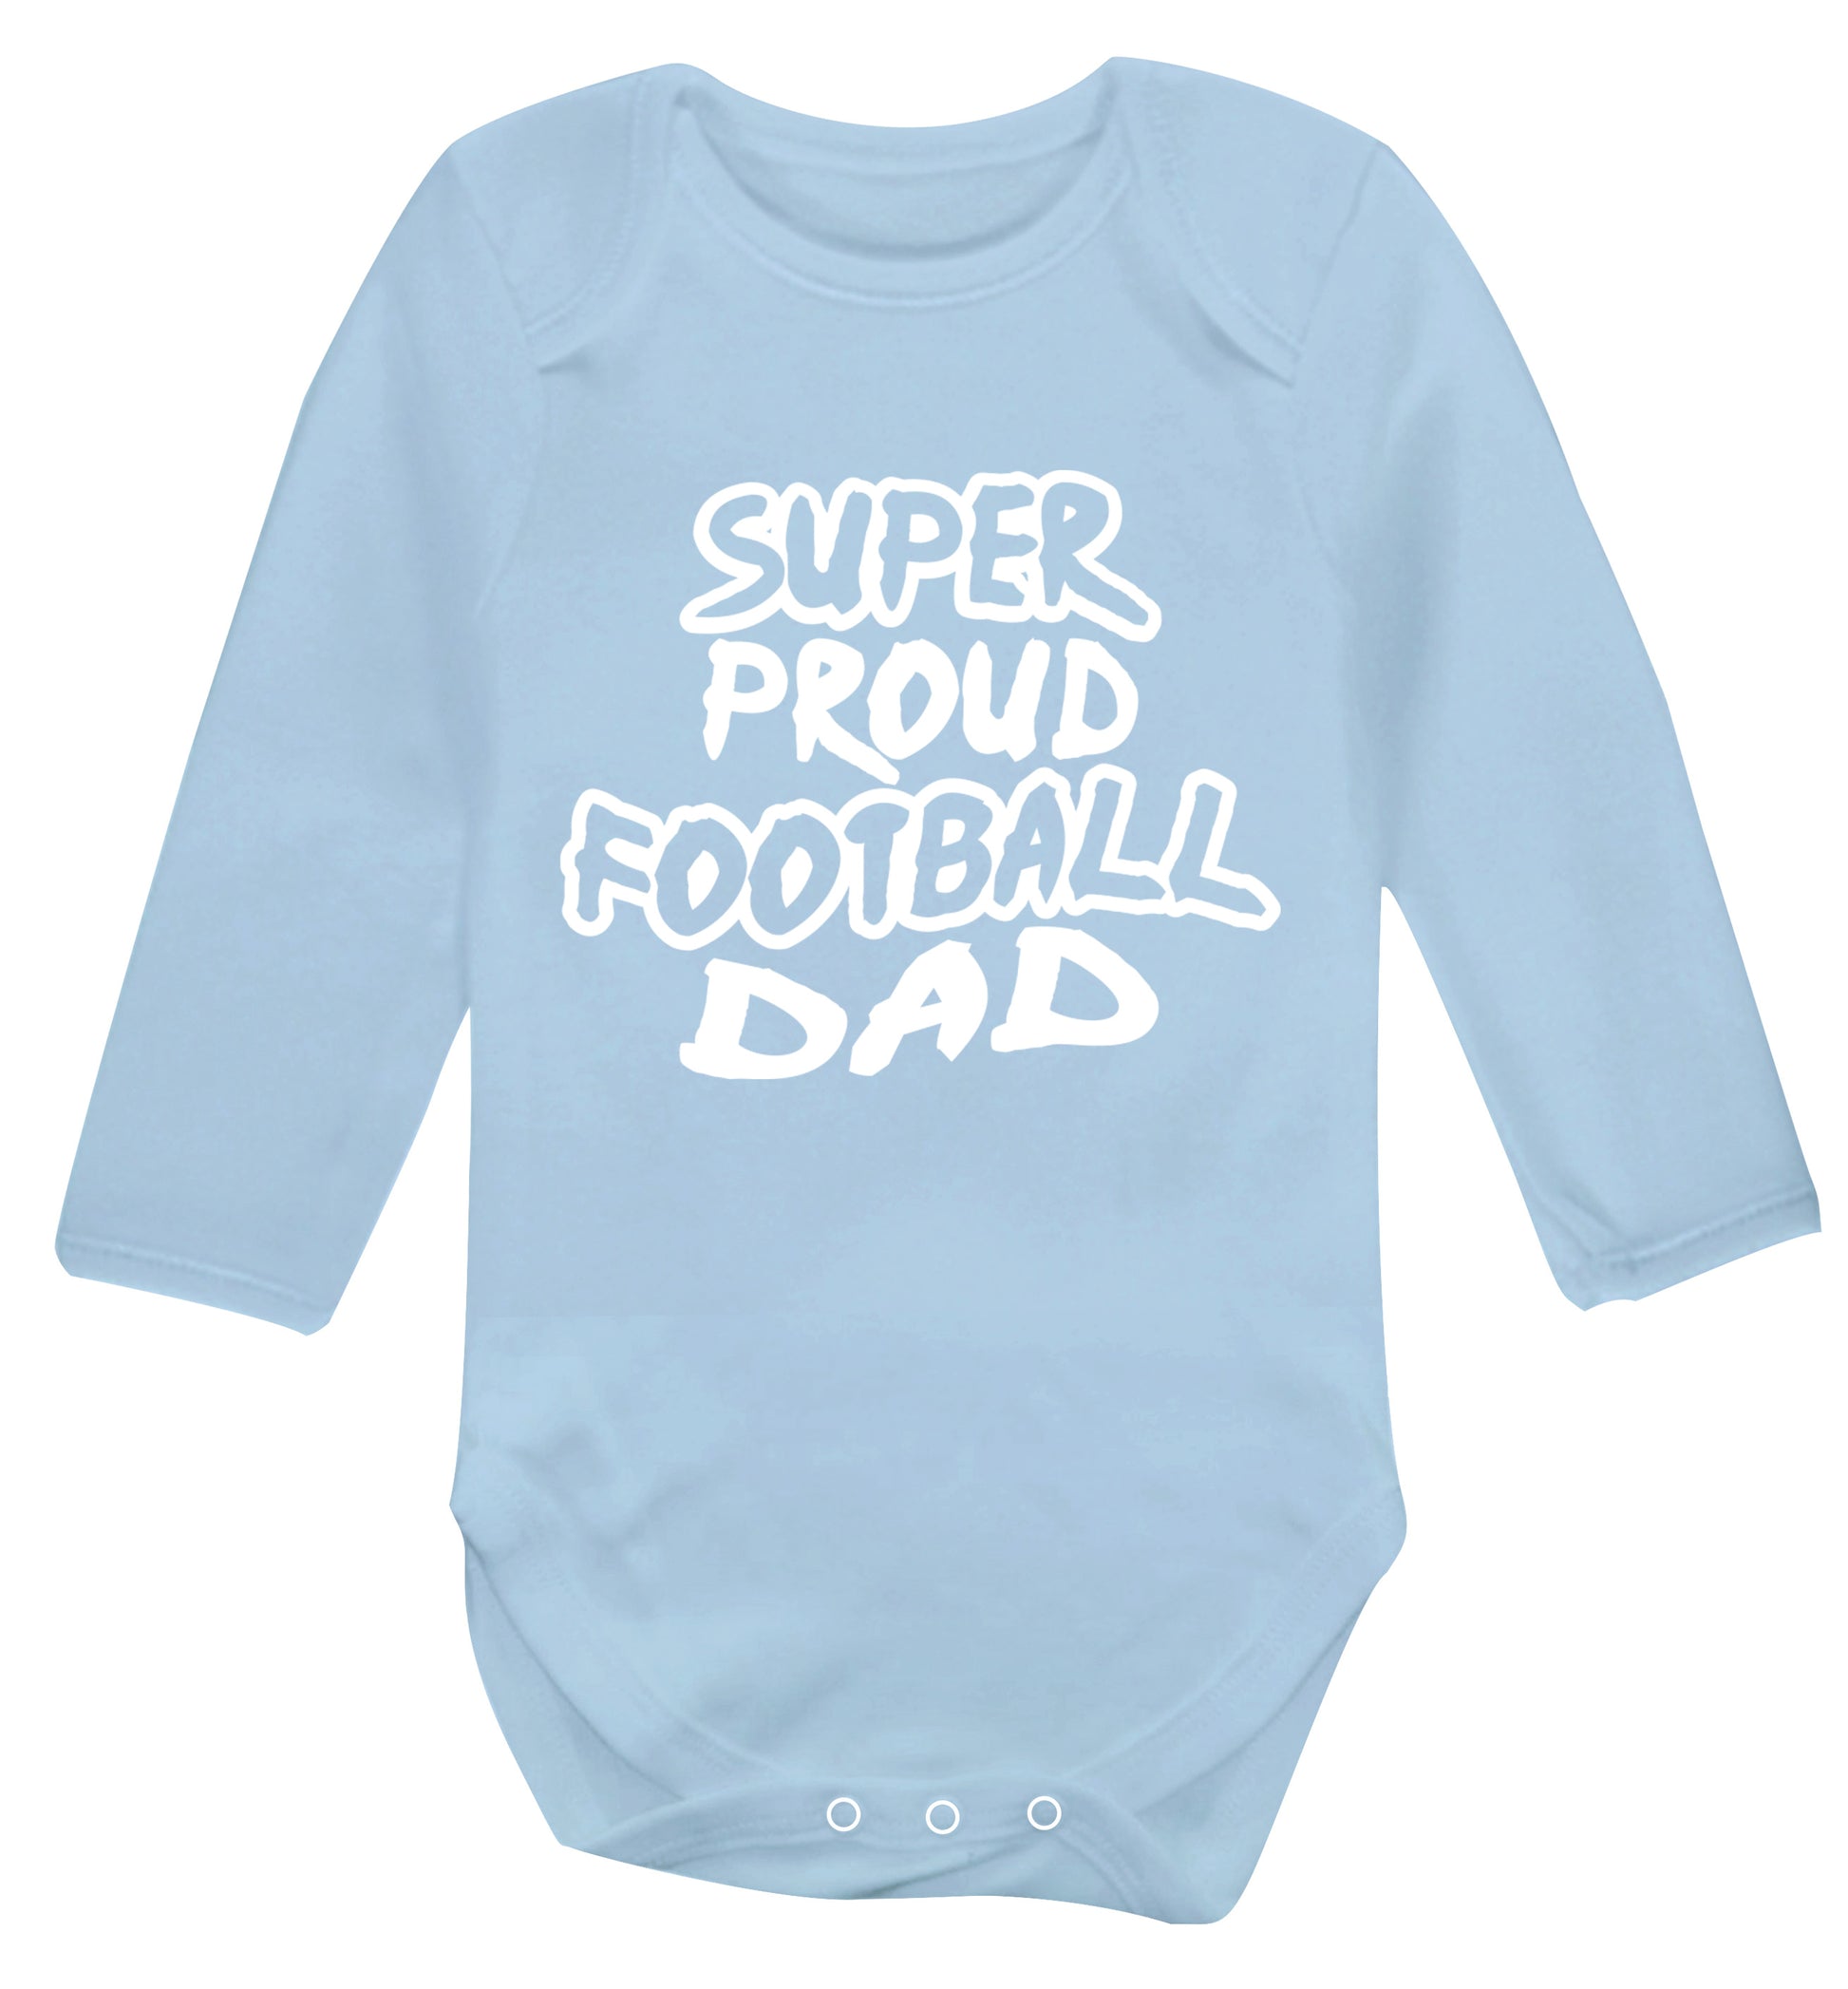 Super proud football dad Baby Vest long sleeved pale blue 6-12 months